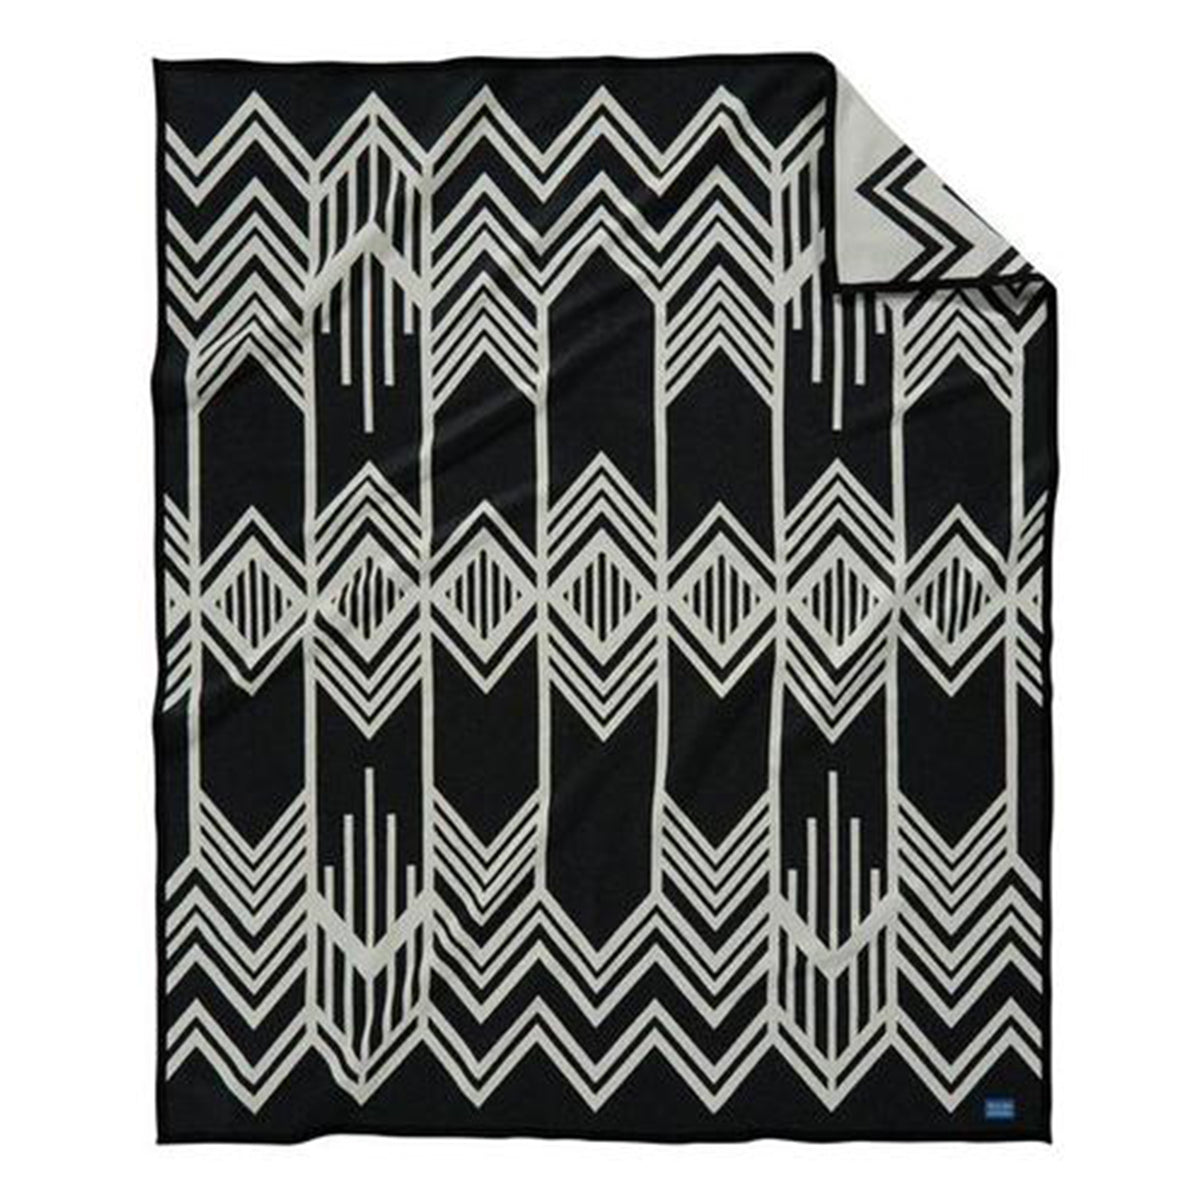 Pendleton blankets are heirloom-quality wool blankets made in the USA using wool that sourced from ranches around the country. This reversible skywalkers design was inspired by the Art Deco design elements that distinguish New York City’s most iconic buildings, and it was intended to honour the skilled Indigenous steel workers who built some of the city’s landmarks.